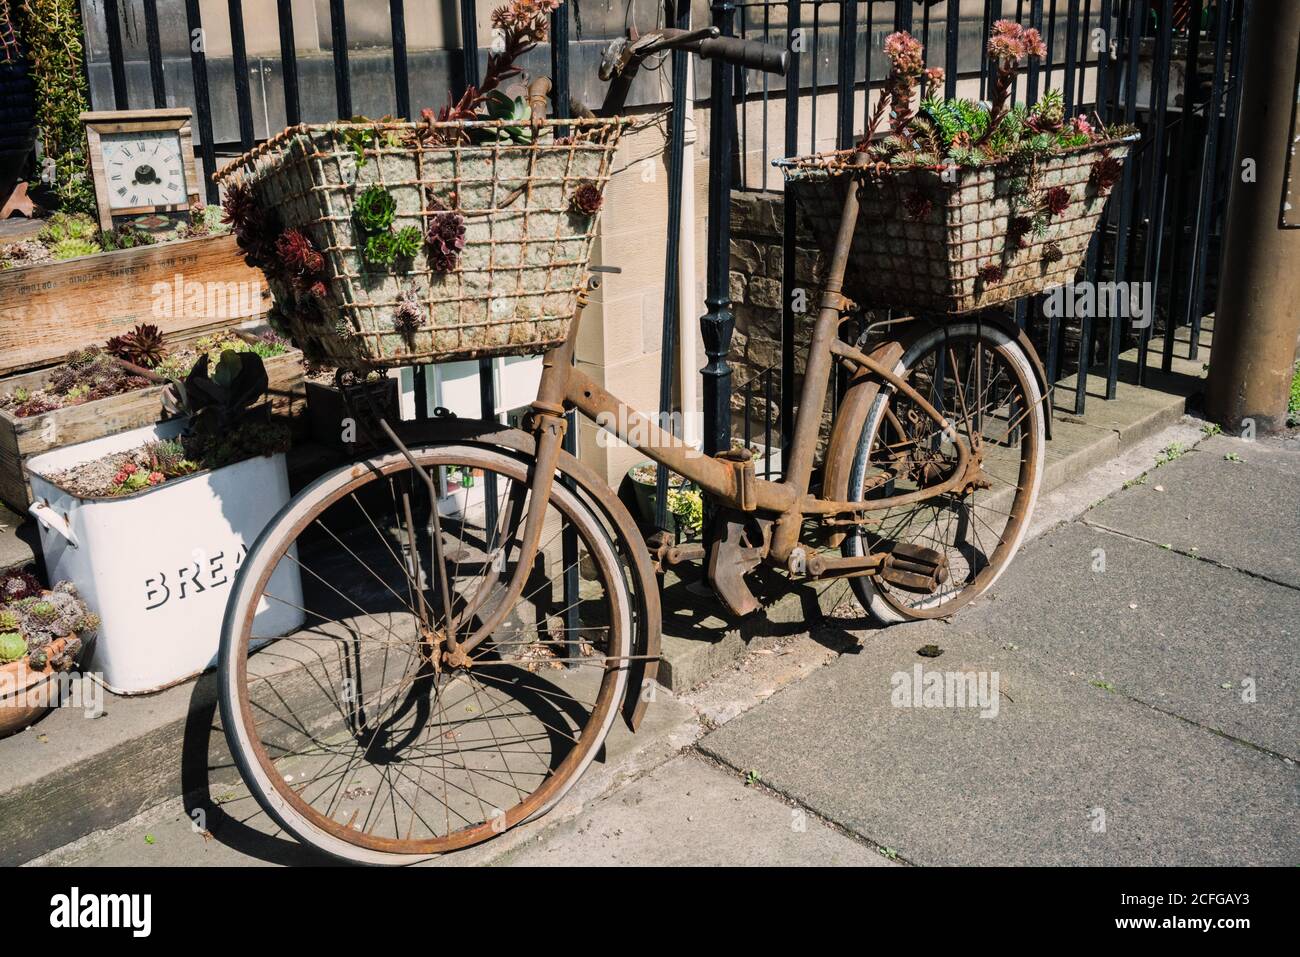 Old rusty bicycle with baskets full of growing succulents and plants on roadside of street, Scotland Stock Photo